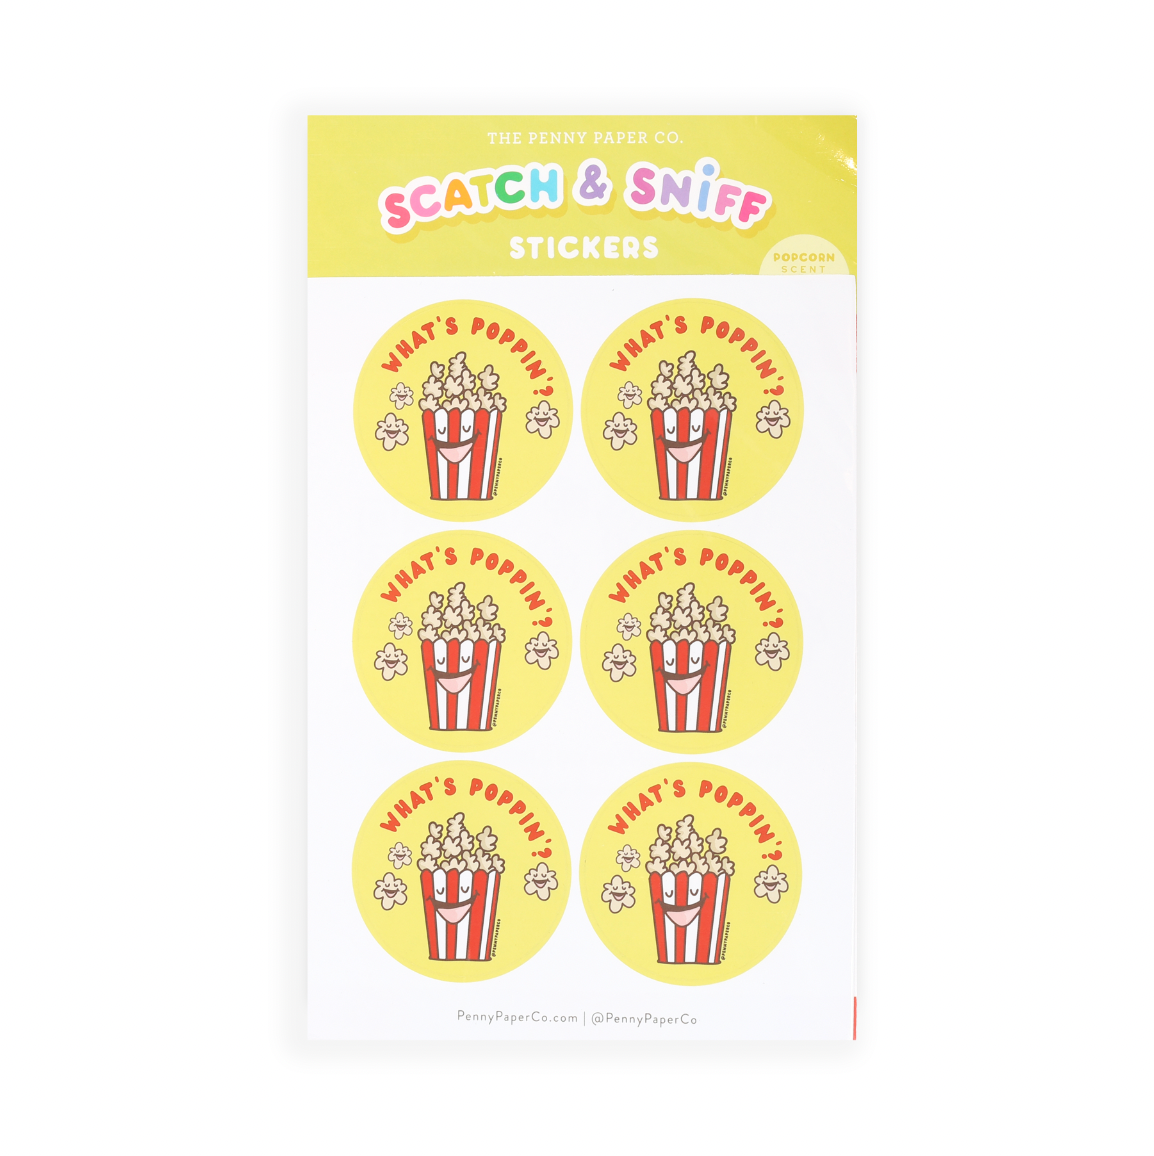 What's Popping? Supersized Popcorn Scratch and Sniff Stickers